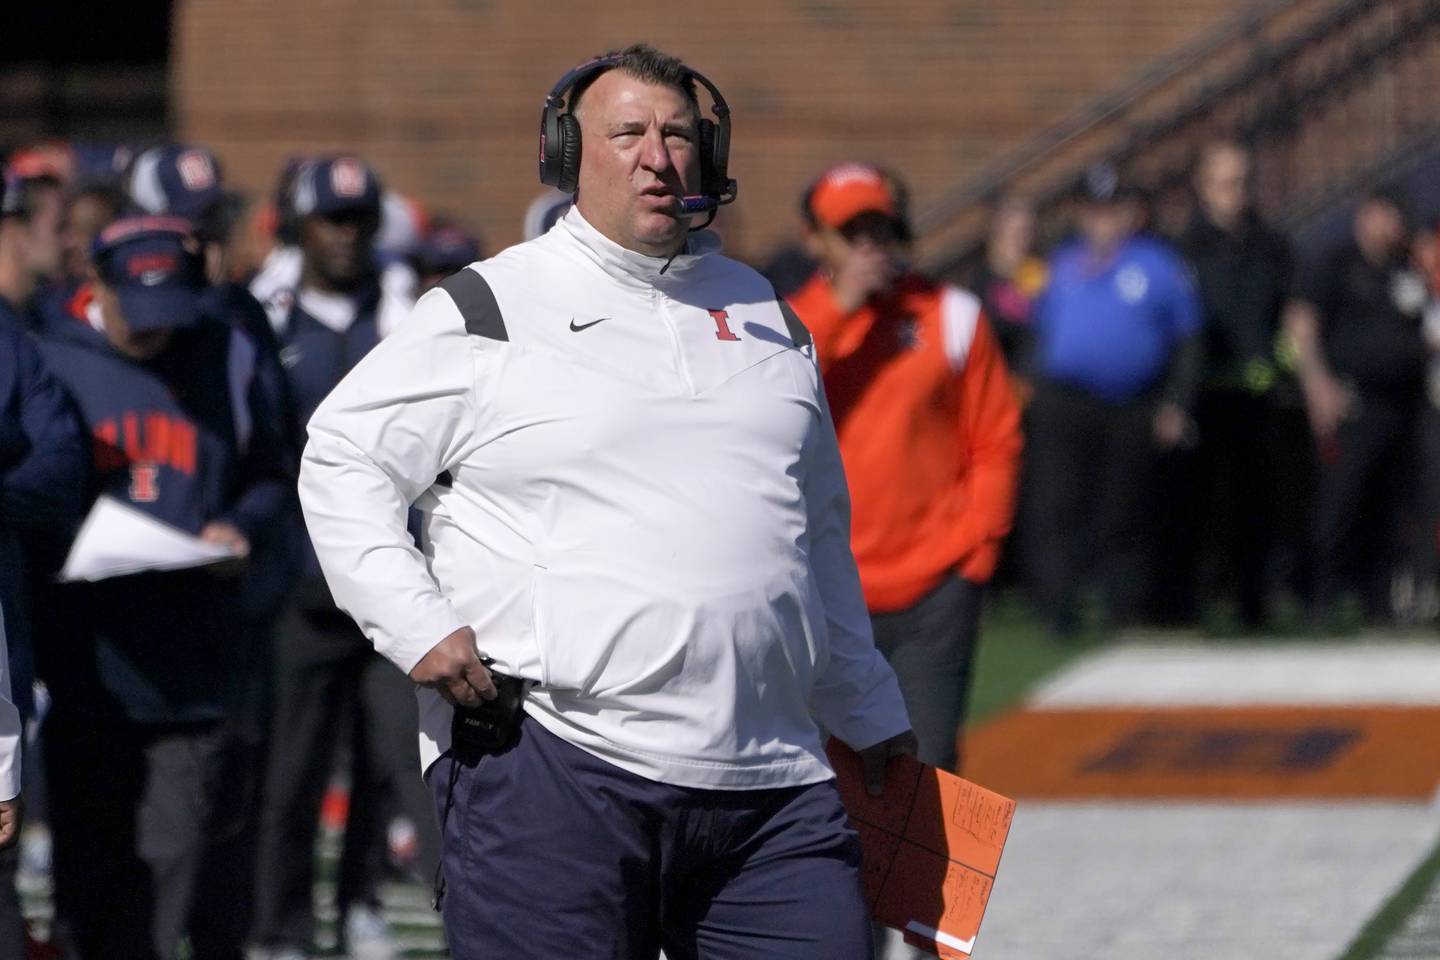 Illinois coach Bret Bielema looks at the scoreboard during a game against Minnesota on Oct. 15, 2022.